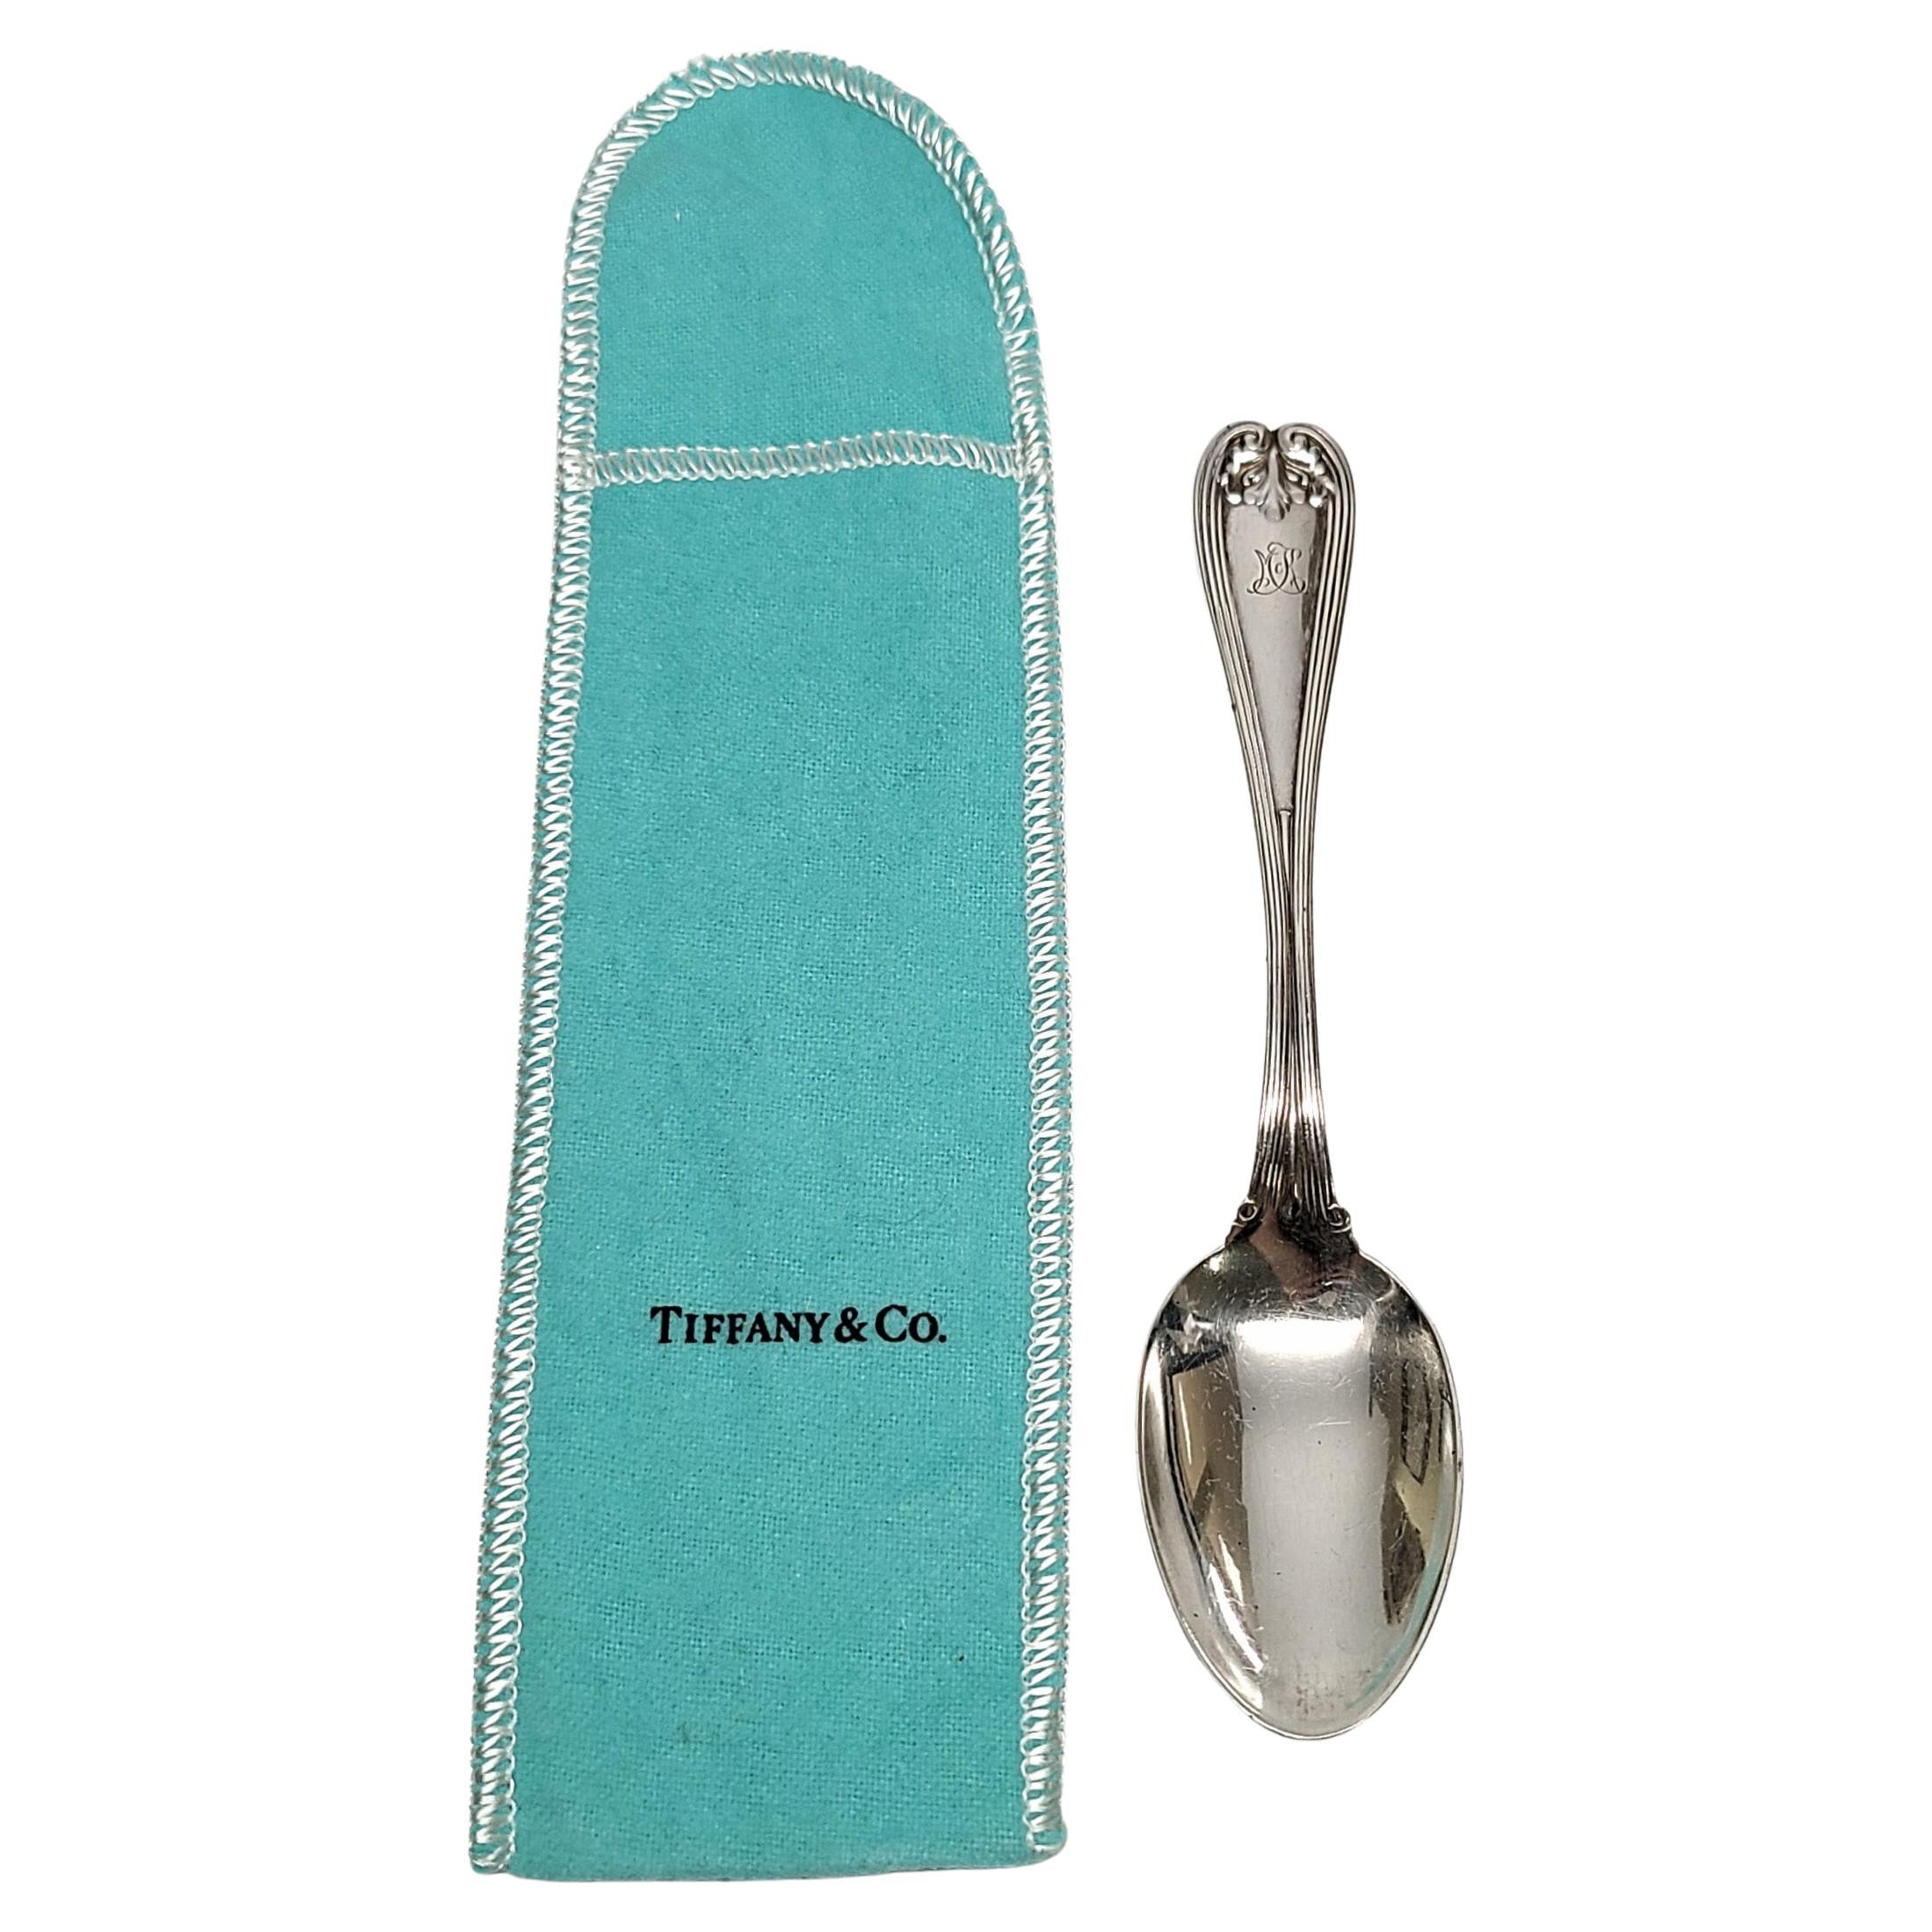 Tiffany & Co Sterling Silver Colonial Tea Spoon with Monogram with Pouch